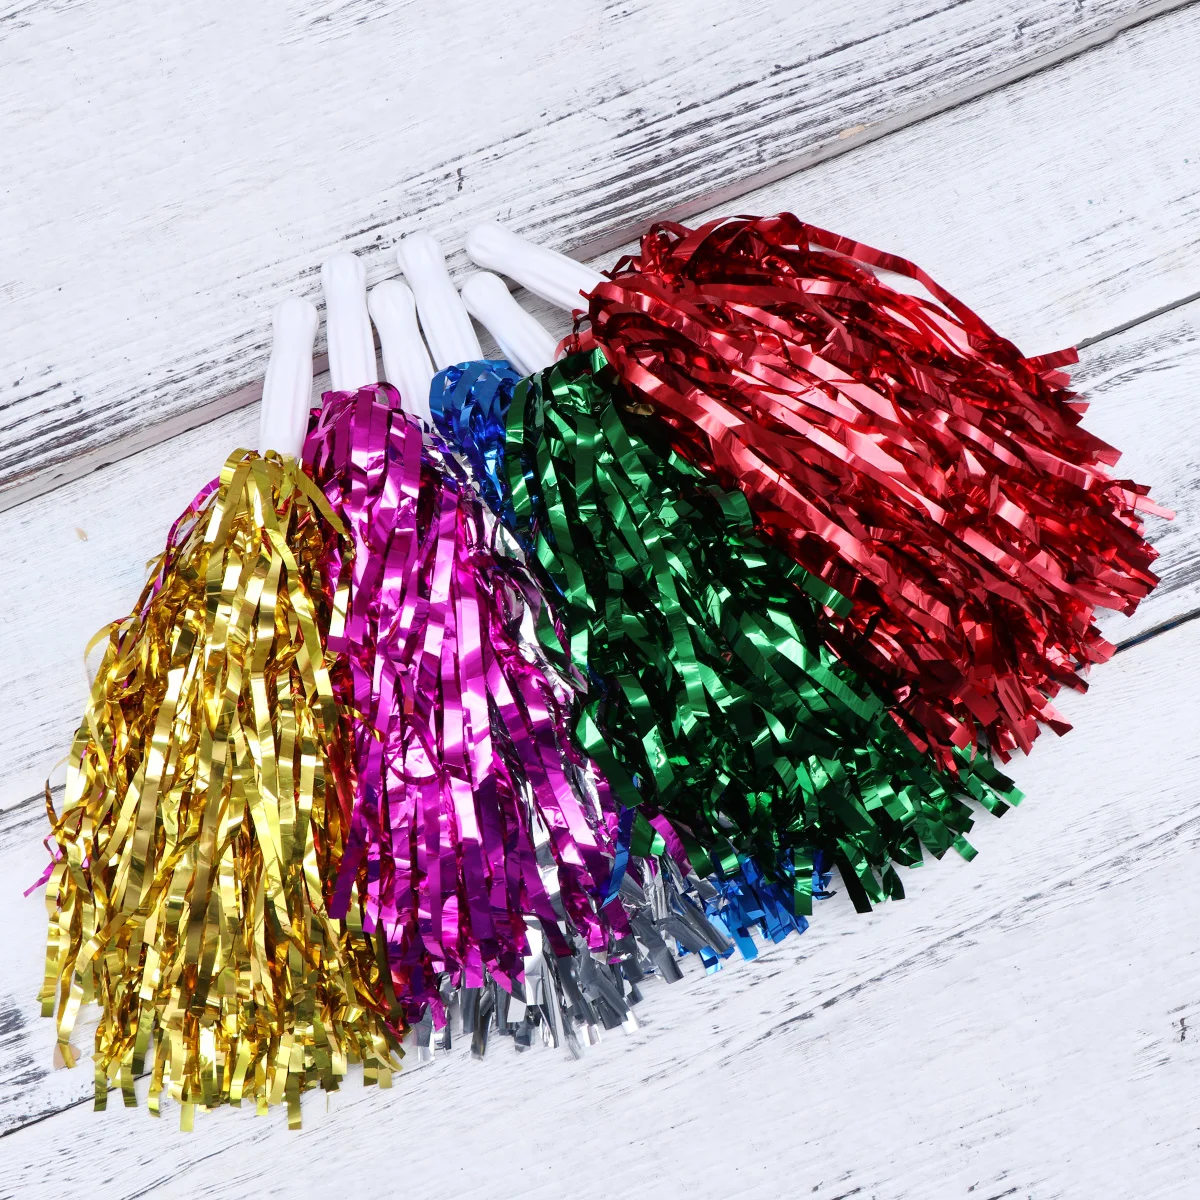 12pcs Straight Handle Cheering Poms Spirited Fun Cheerleading Kit Cheer Props for Performance Competition Cheering Sports Events 12 pcs cheerleading hand flower ballpit balls pom poms delicate props cheering the pet cheerleader compact sports meeting